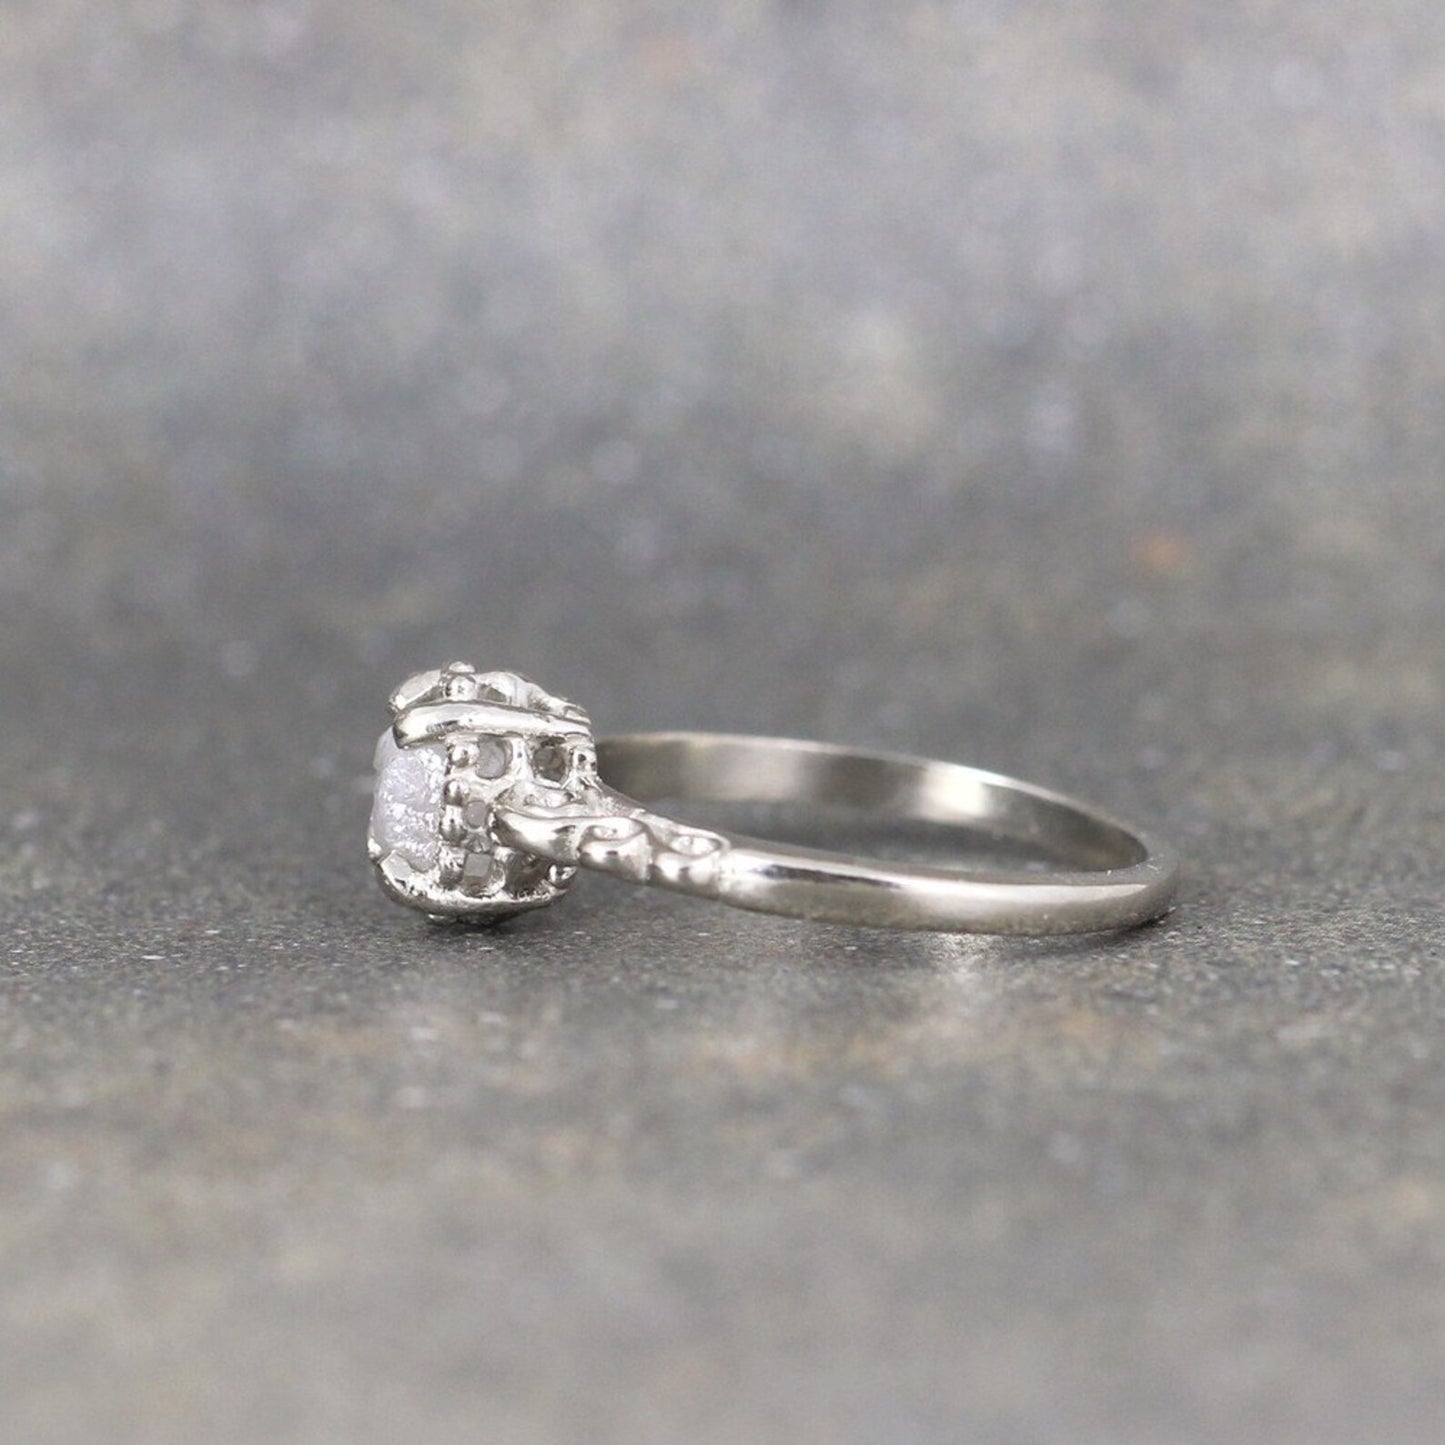 14K White Gold and Raw Diamond Ring - Filigree Style Engagement Ring